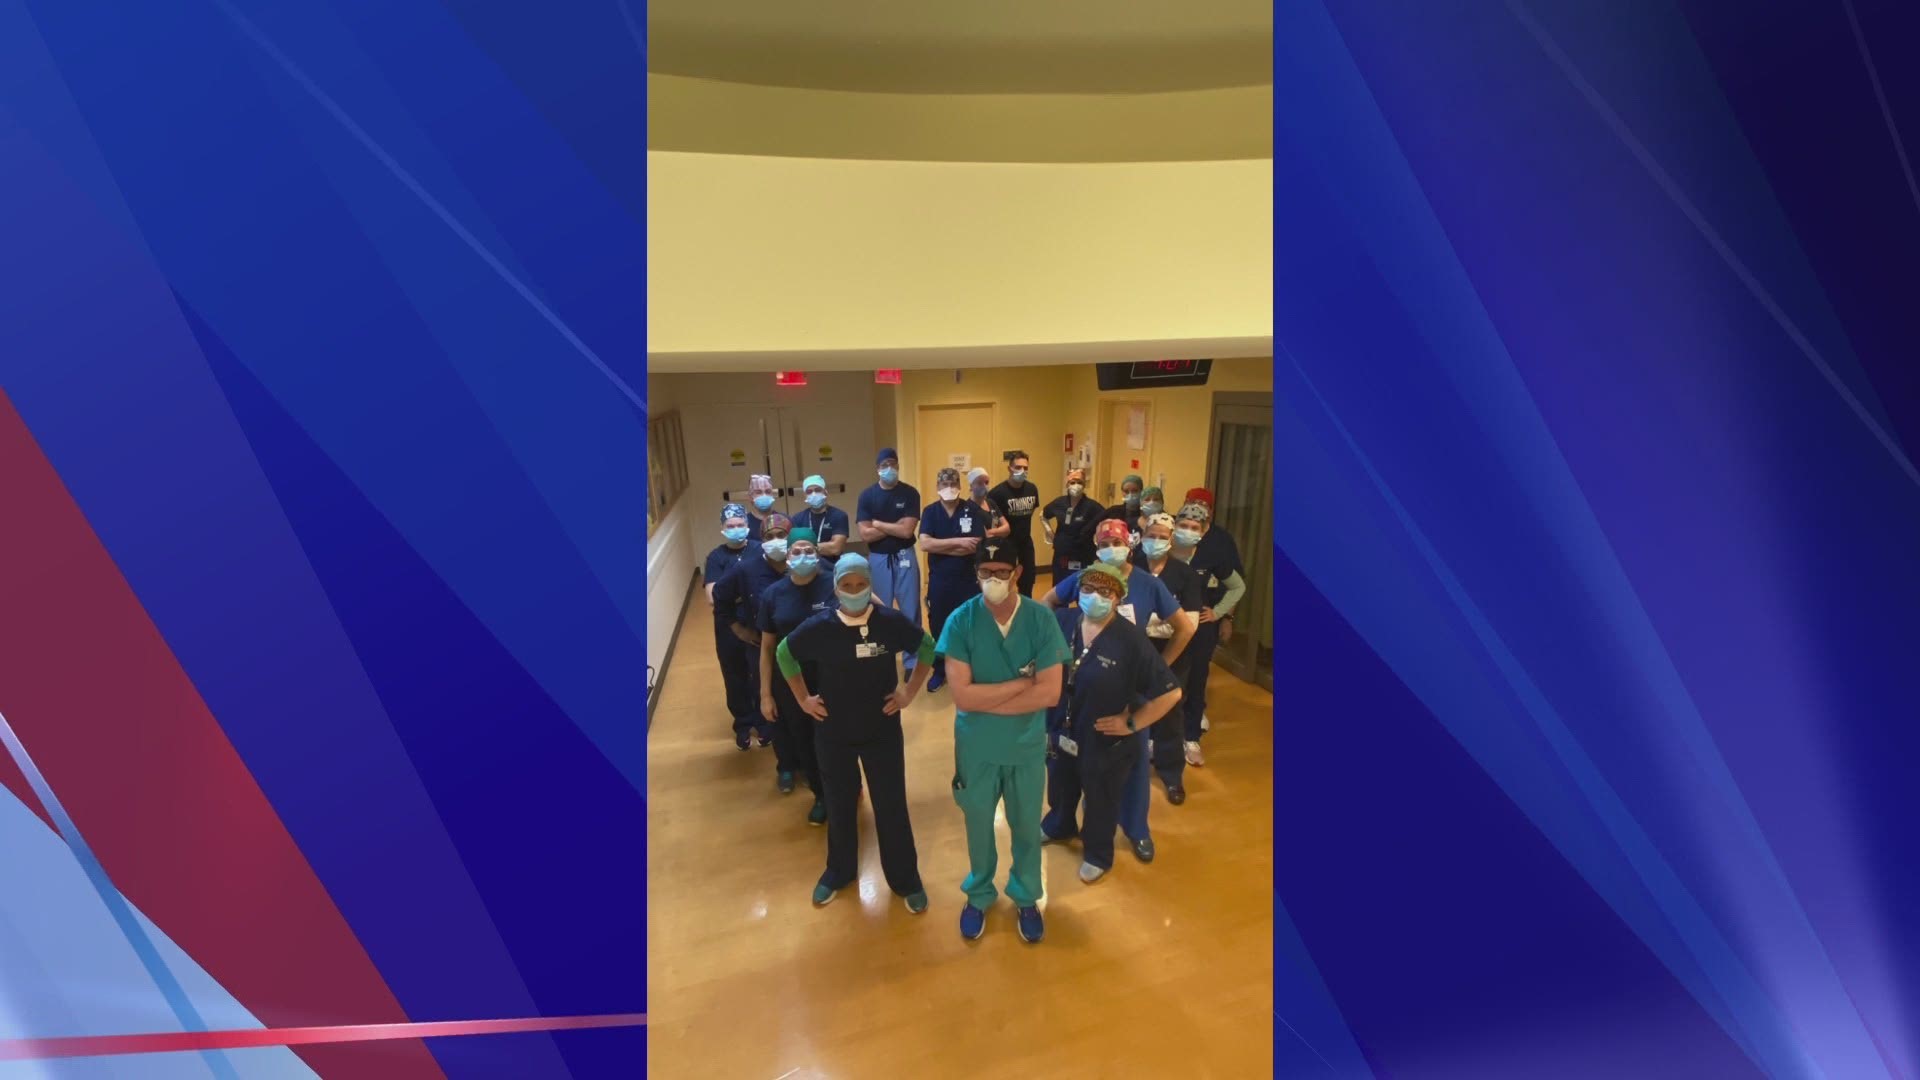 We hear from a registered nurse who works in a COVID-19 ICU united at St. Vincent's Medical Center in Bridgeport